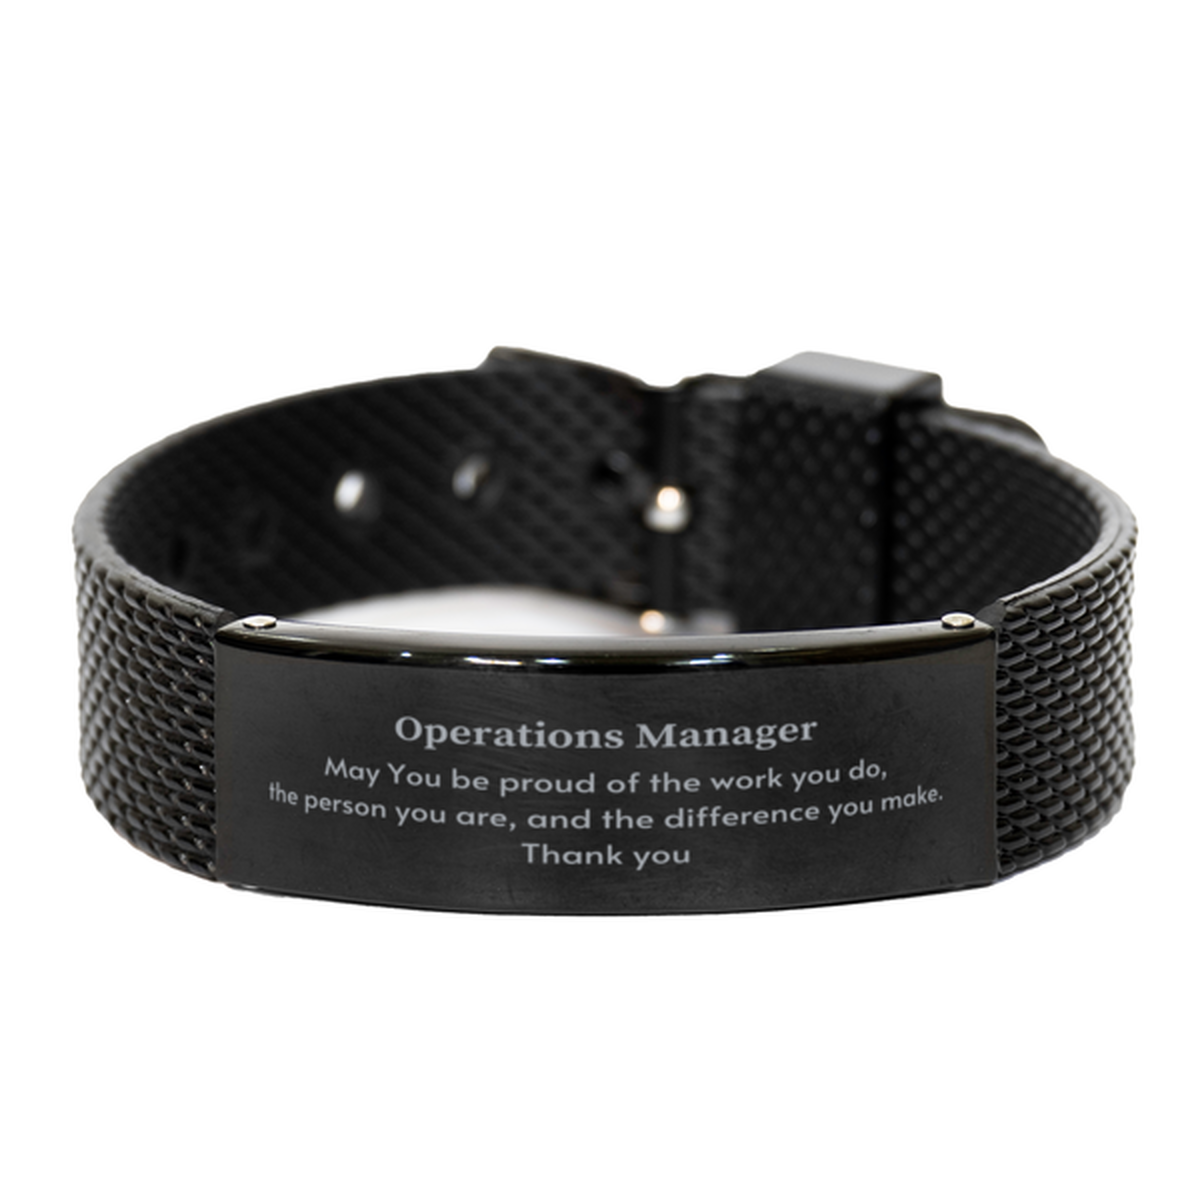 Heartwarming Black Shark Mesh Bracelet Retirement Coworkers Gifts for Operations Manager, Operations Manager May You be proud of the work you do, the person you are Gifts for Boss Men Women Friends